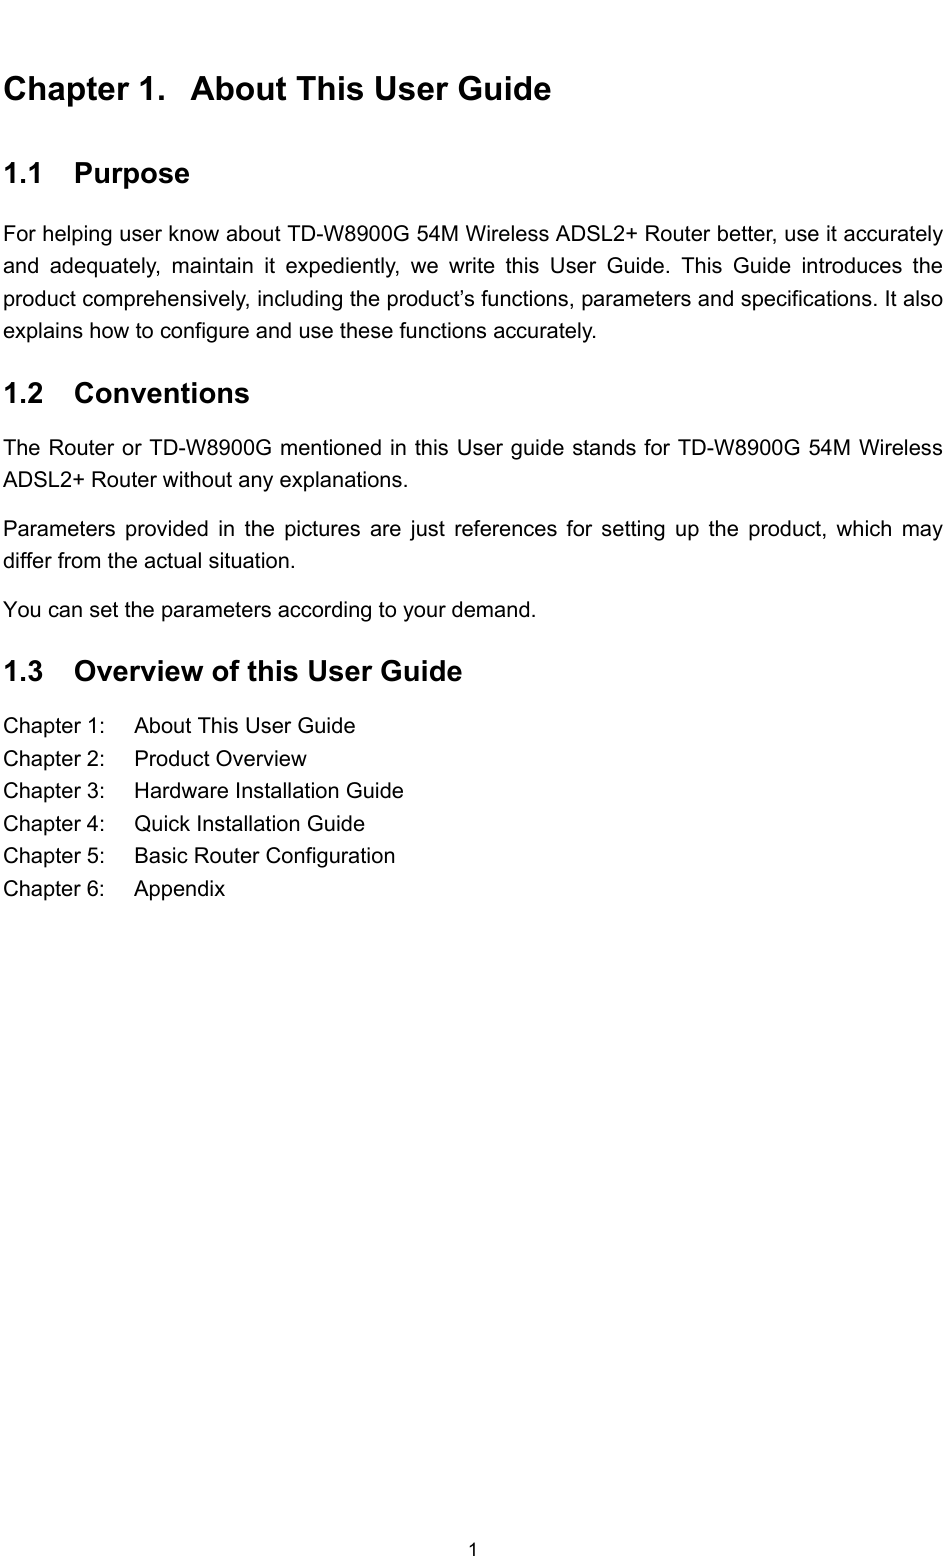  1 Chapter 1.  About This User Guide 1.1  Purpose For helping user know about TD-W8900G 54M Wireless ADSL2+ Router better, use it accurately and adequately, maintain it expediently, we write this User Guide. This Guide introduces the product comprehensively, including the product’s functions, parameters and specifications. It also explains how to configure and use these functions accurately. 1.2  Conventions The Router or TD-W8900G mentioned in this User guide stands for TD-W8900G 54M Wireless ADSL2+ Router without any explanations. Parameters provided in the pictures are just references for setting up the product, which may differ from the actual situation. You can set the parameters according to your demand. 1.3  Overview of this User Guide Chapter 1:  About This User Guide Chapter 2:  Product Overview Chapter 3:  Hardware Installation Guide Chapter 4:  Quick Installation Guide Chapter 5:  Basic Router Configuration Chapter 6:  Appendix 